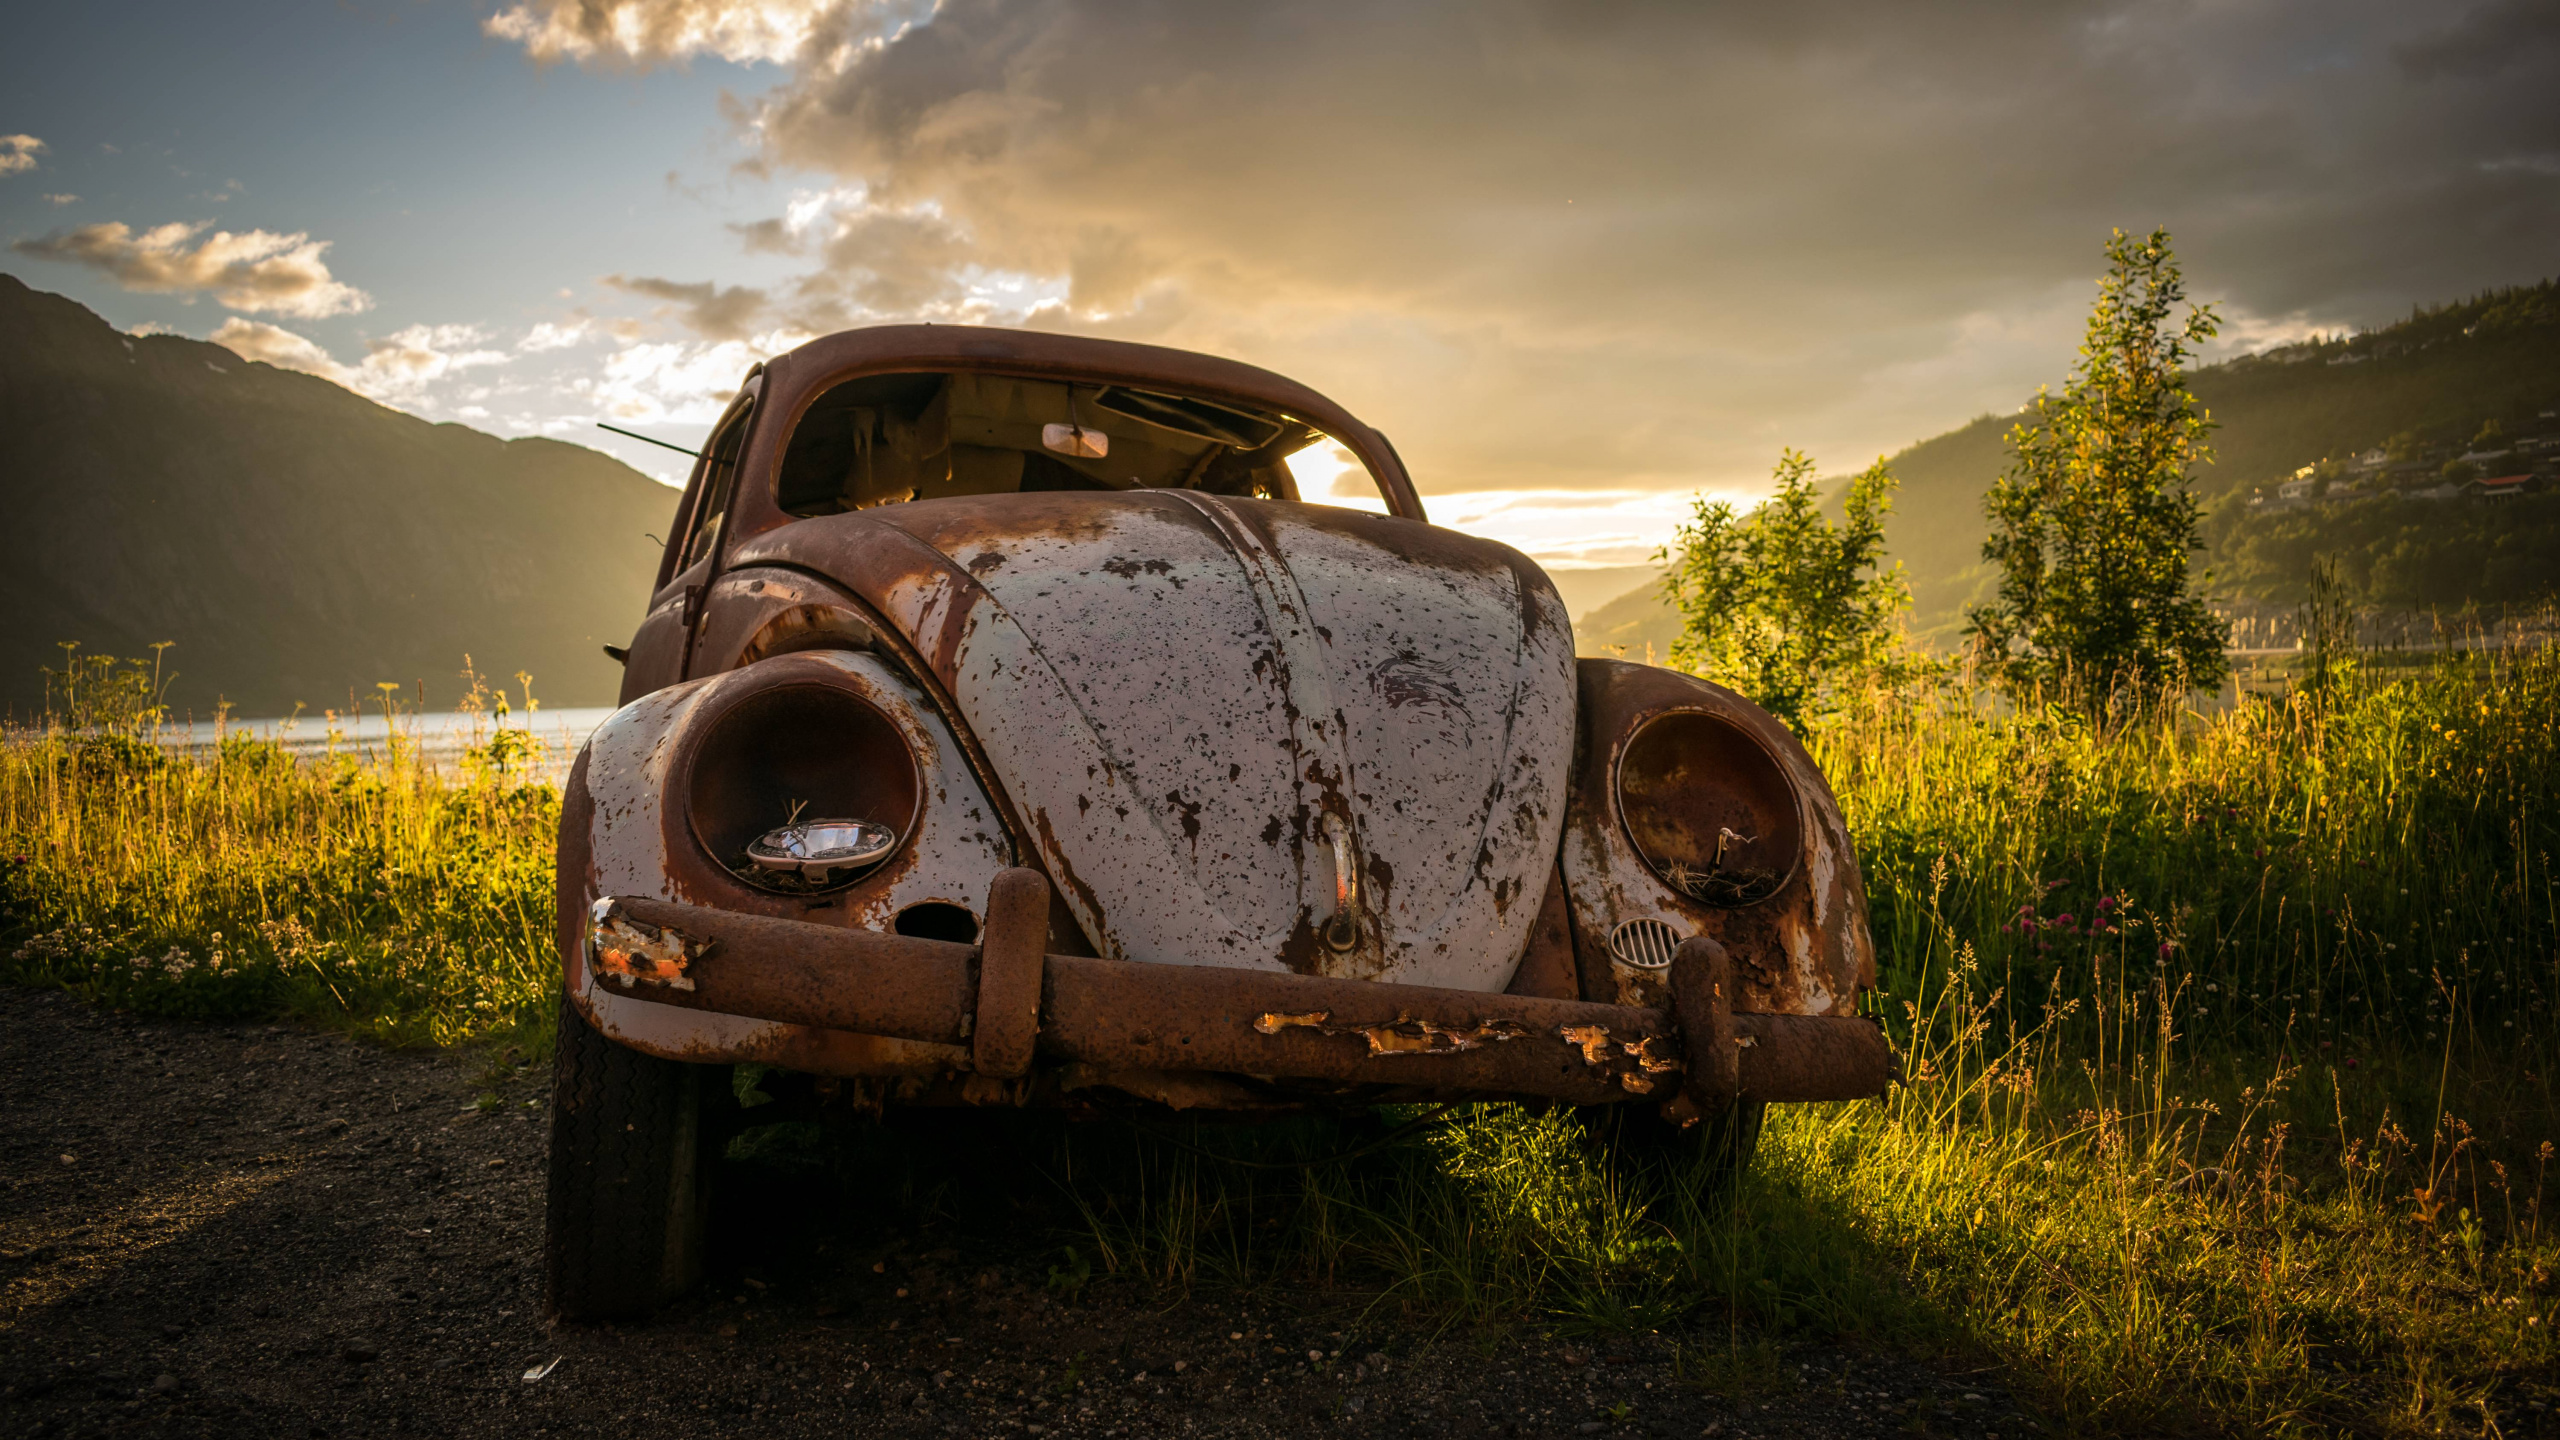 Brown Vintage Car on Green Grass Field During Daytime. Wallpaper in 2560x1440 Resolution